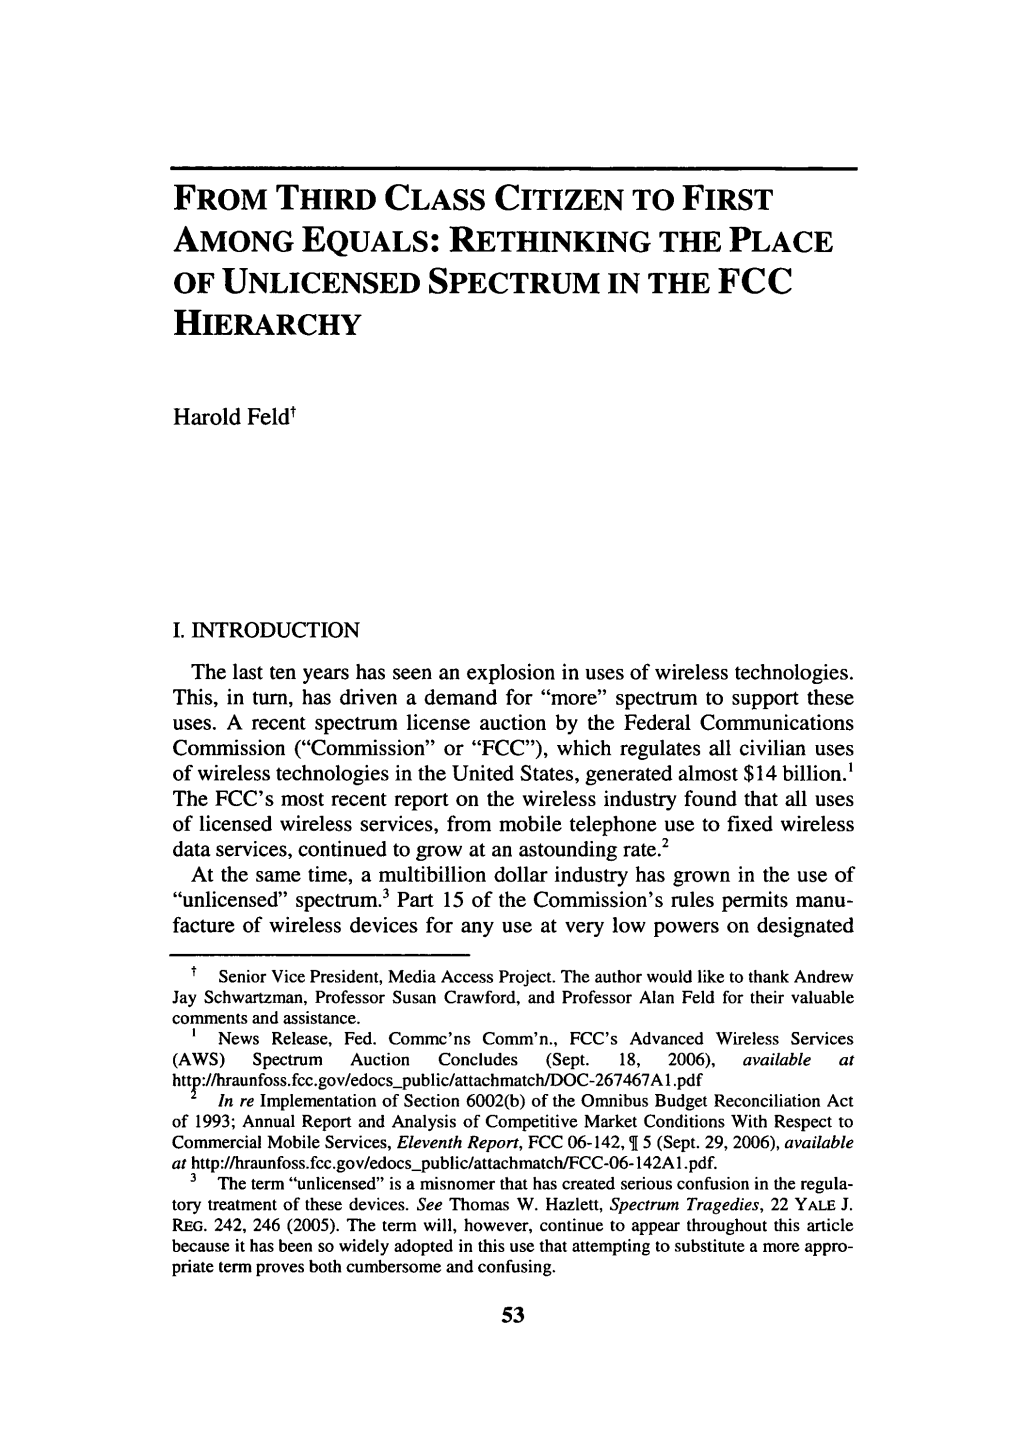 From Third Class Citizen to First Among Equals: Rethinking the Place of Unlicensed Spectrum in the Fcc Hierarchy